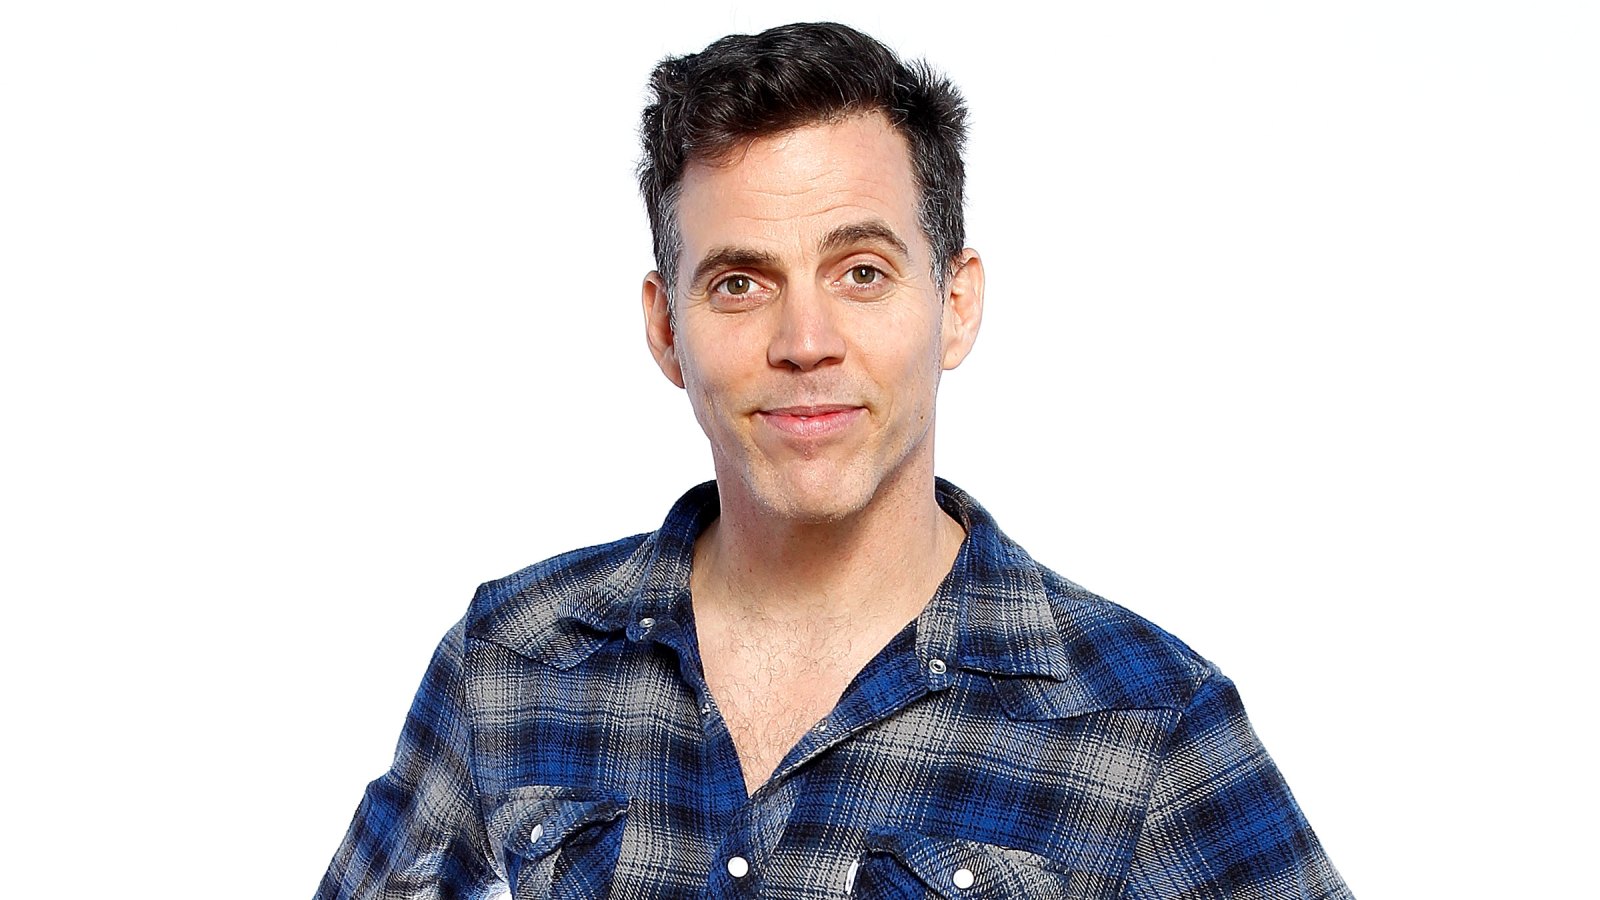 Steve O on Snorting Cocaine Tainted With HIV-Positive Blood: 'This Is How Desperate and Pathetic I Was